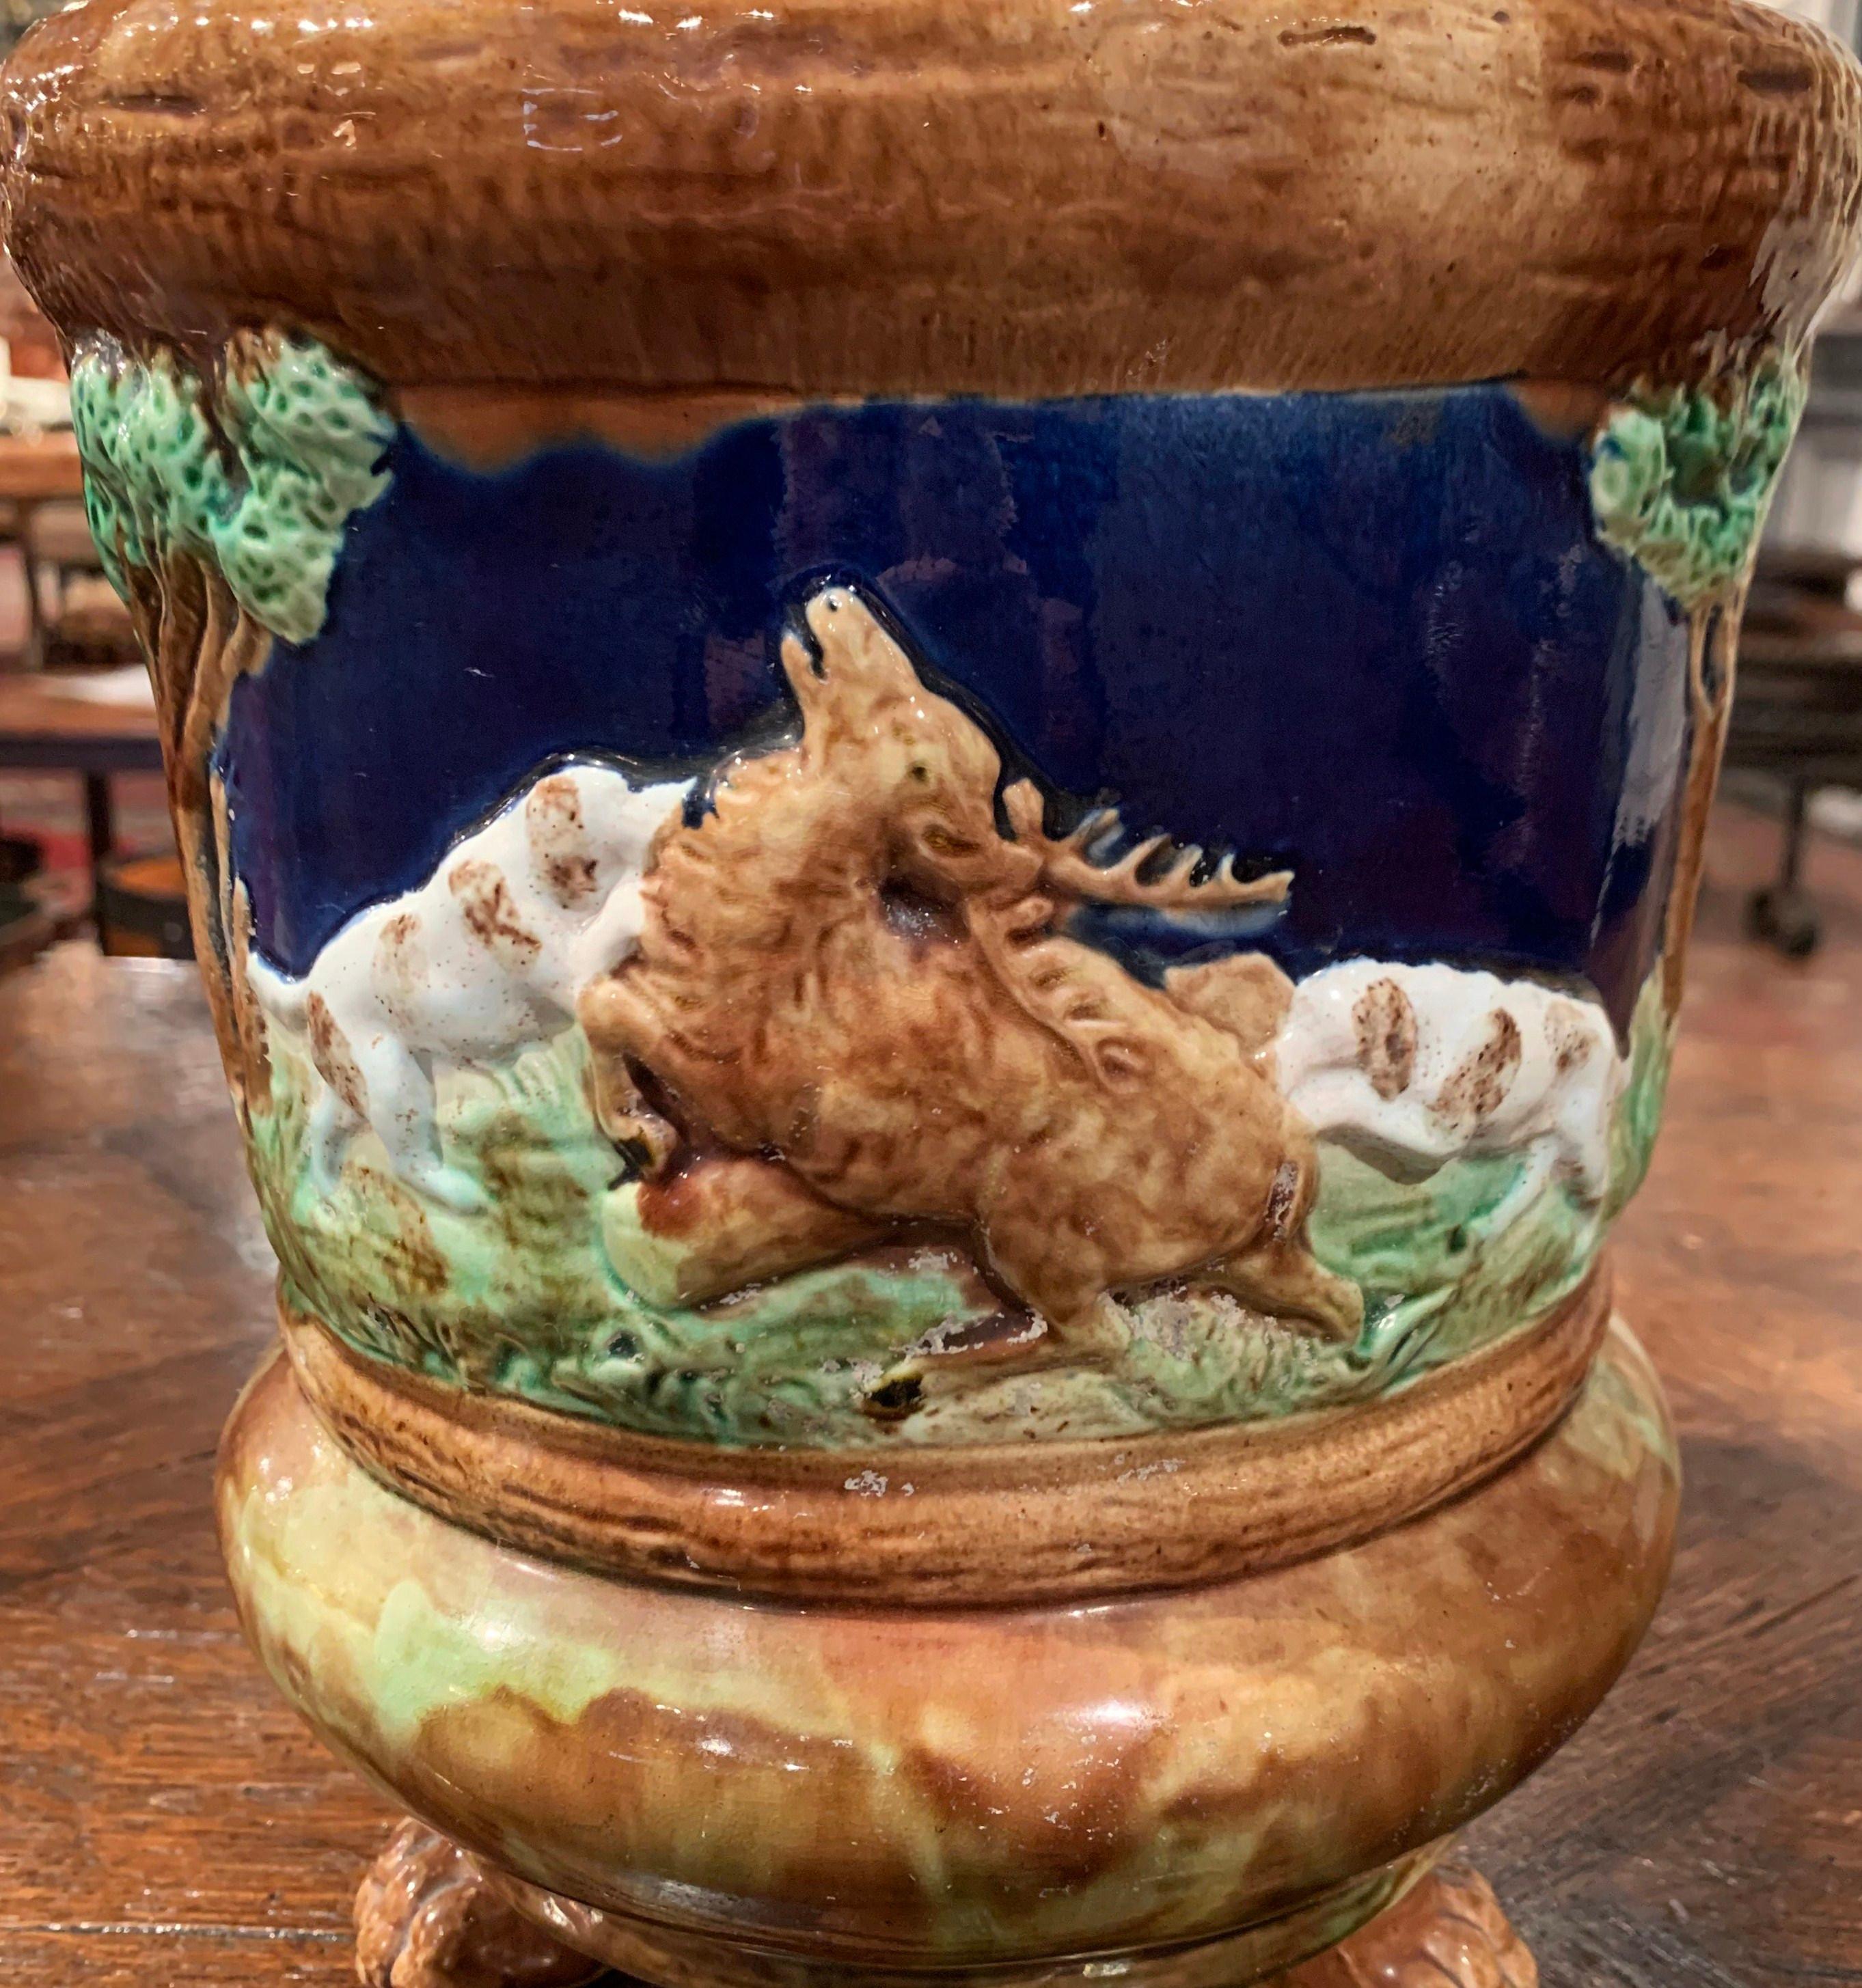 Crafted in Sarreguemines, France circa 1880, the colorful Majolica planter stands on three paw feet; it features a hunt scene in high relief with dogs chasing a deer and flanked by trees on both sides. The round faience cachepot is in excellent